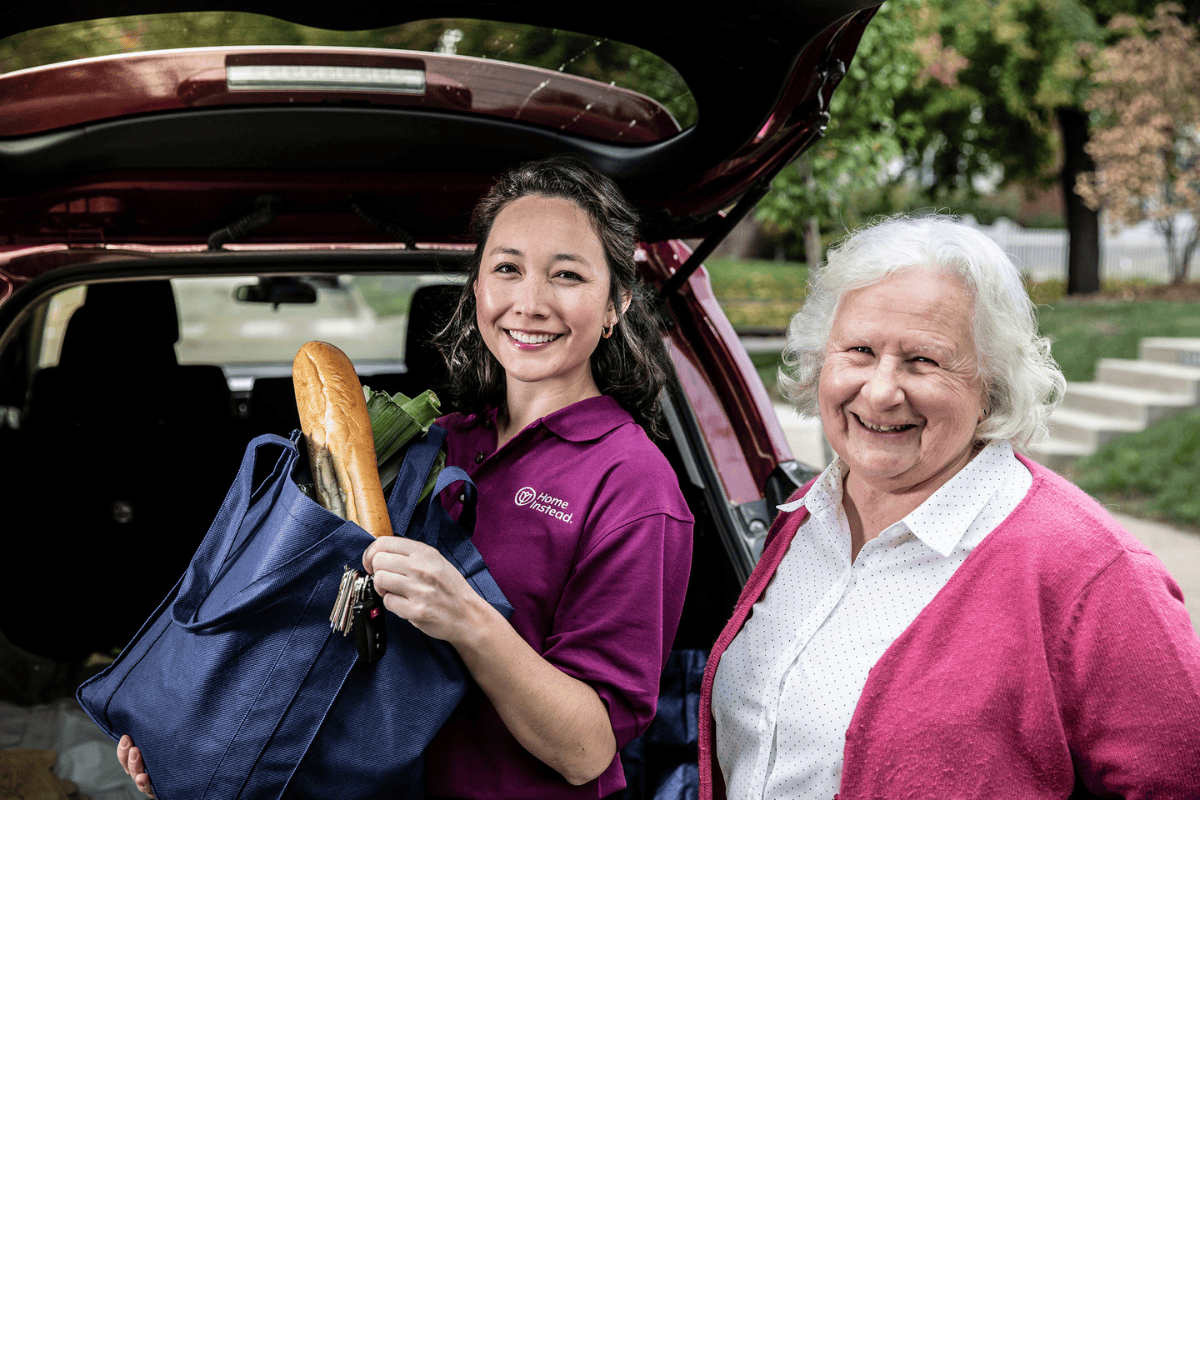 Care Pro helping senior get groceries out of a trunk